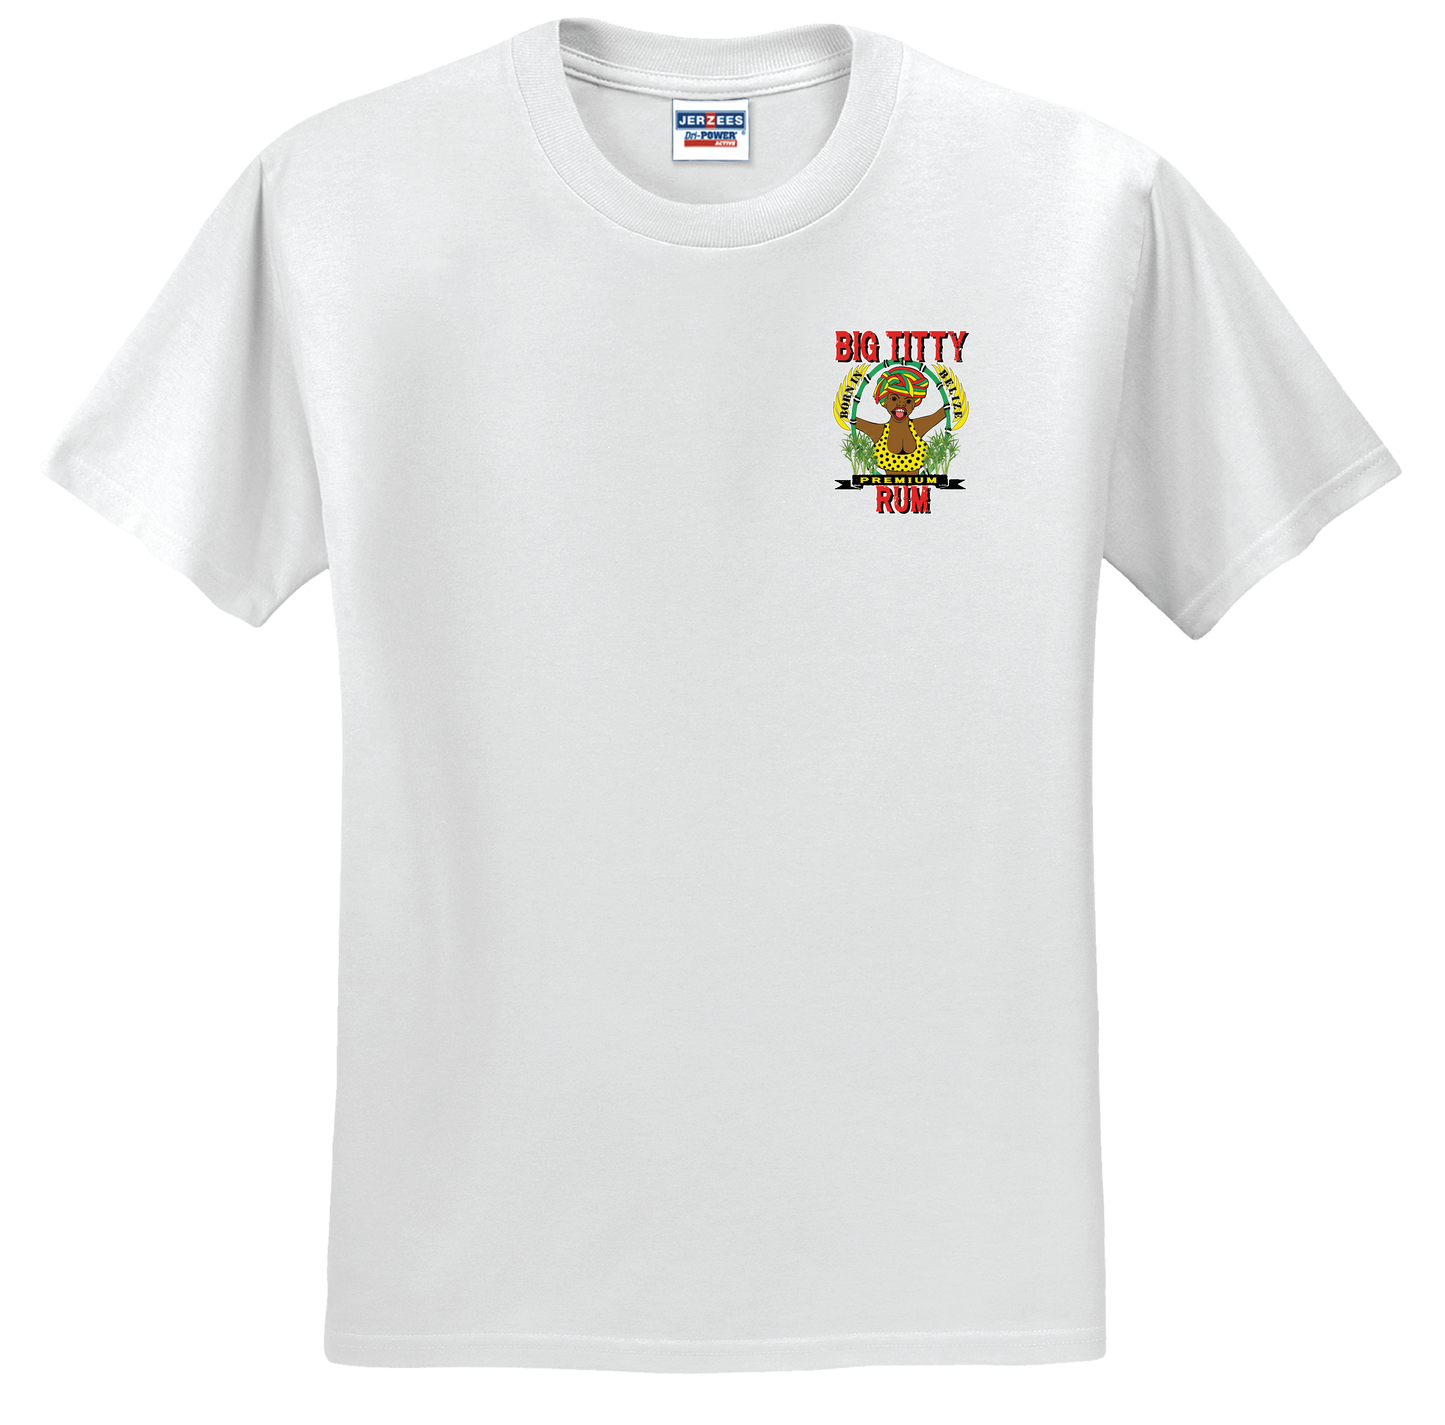 Big Titty Rum Voodoo Waata T shirt - Logo small on front and large on back